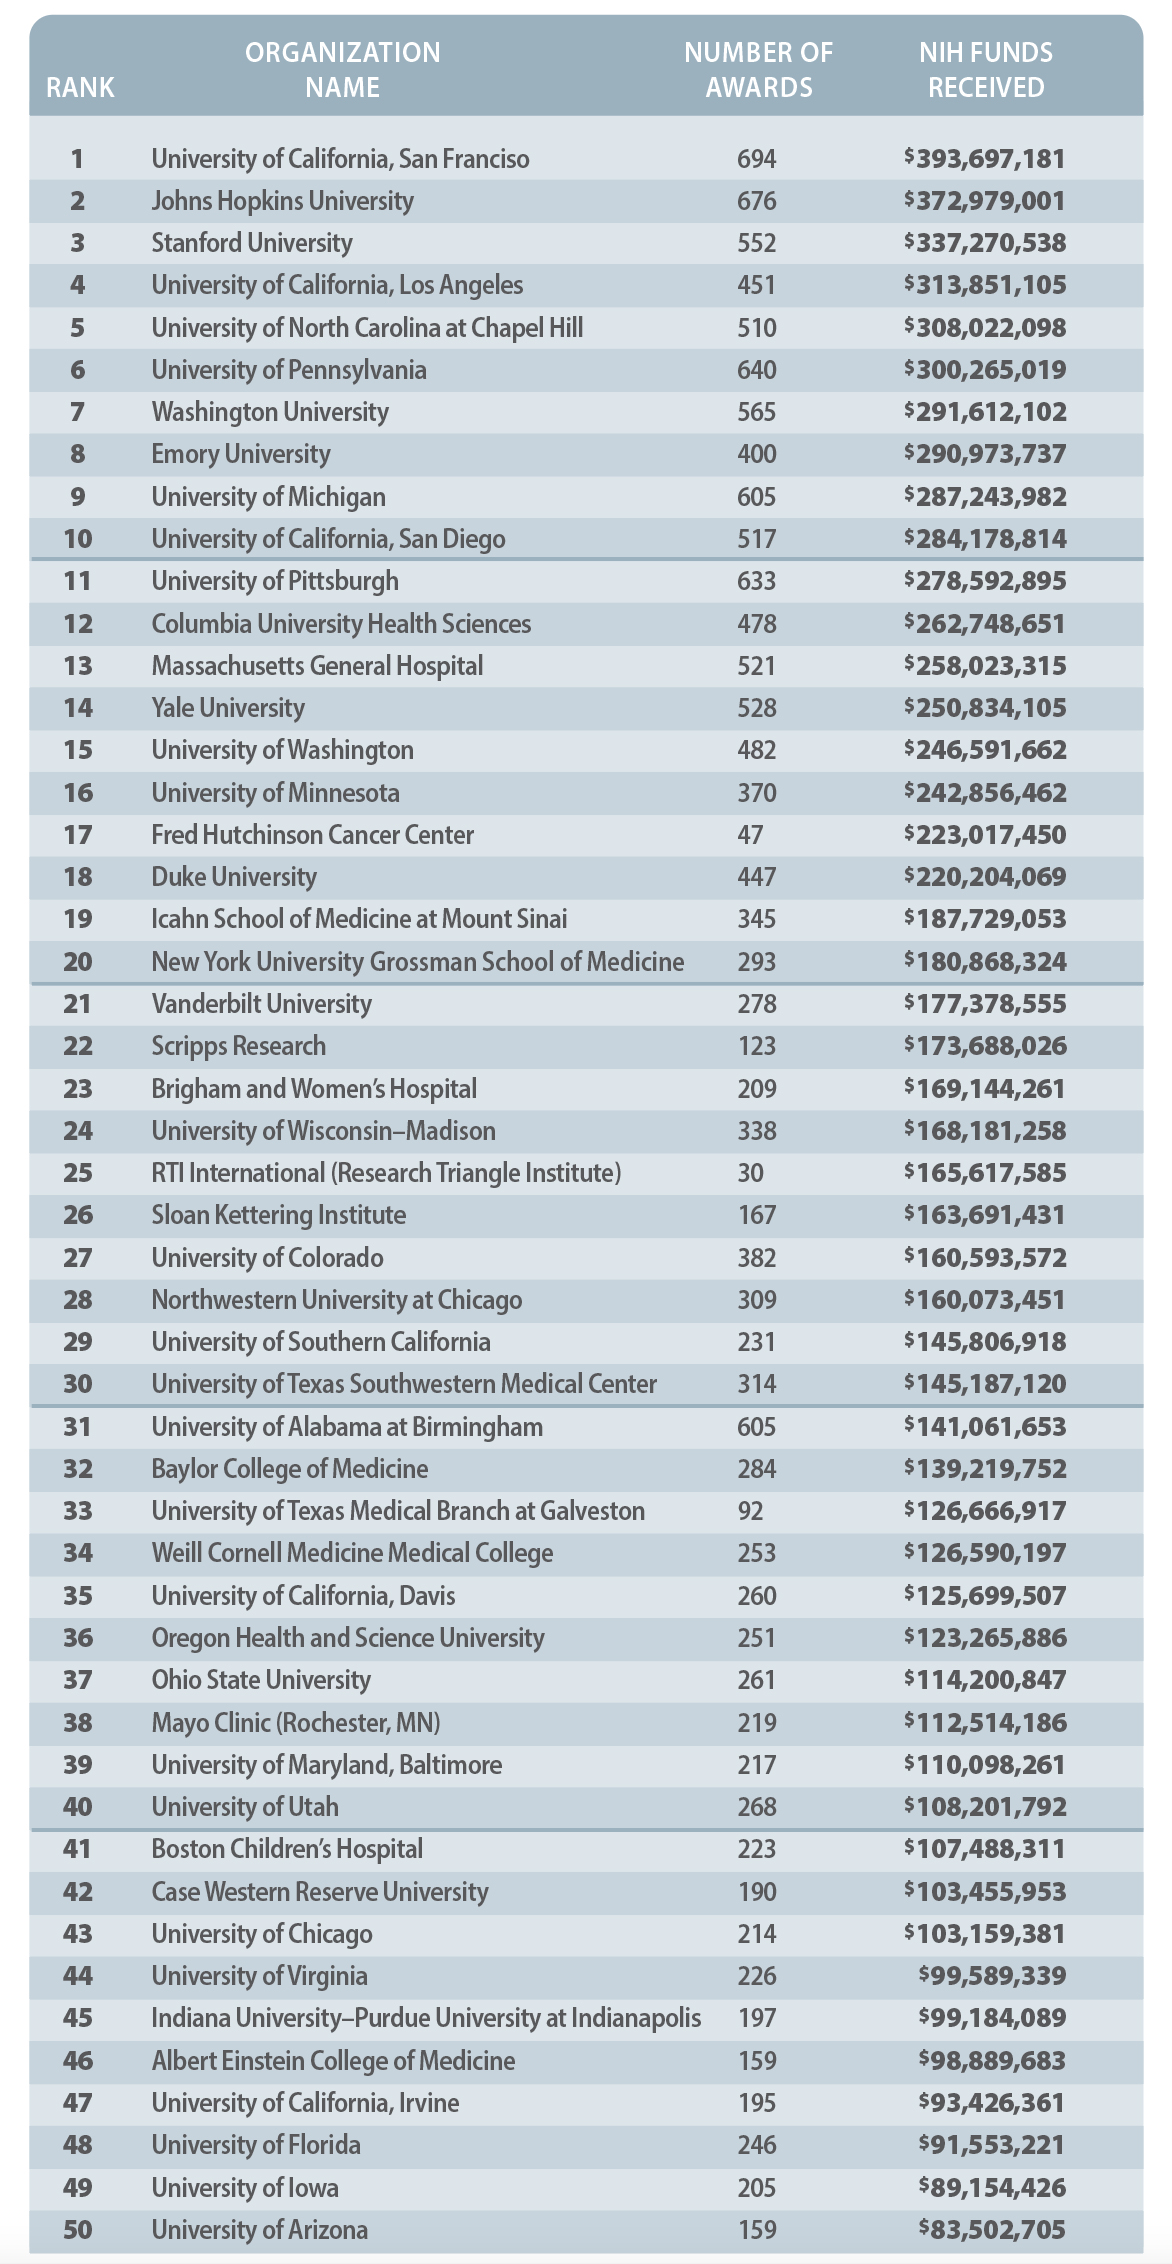 Top 50 NIH-Funded Institutions of 2022 list